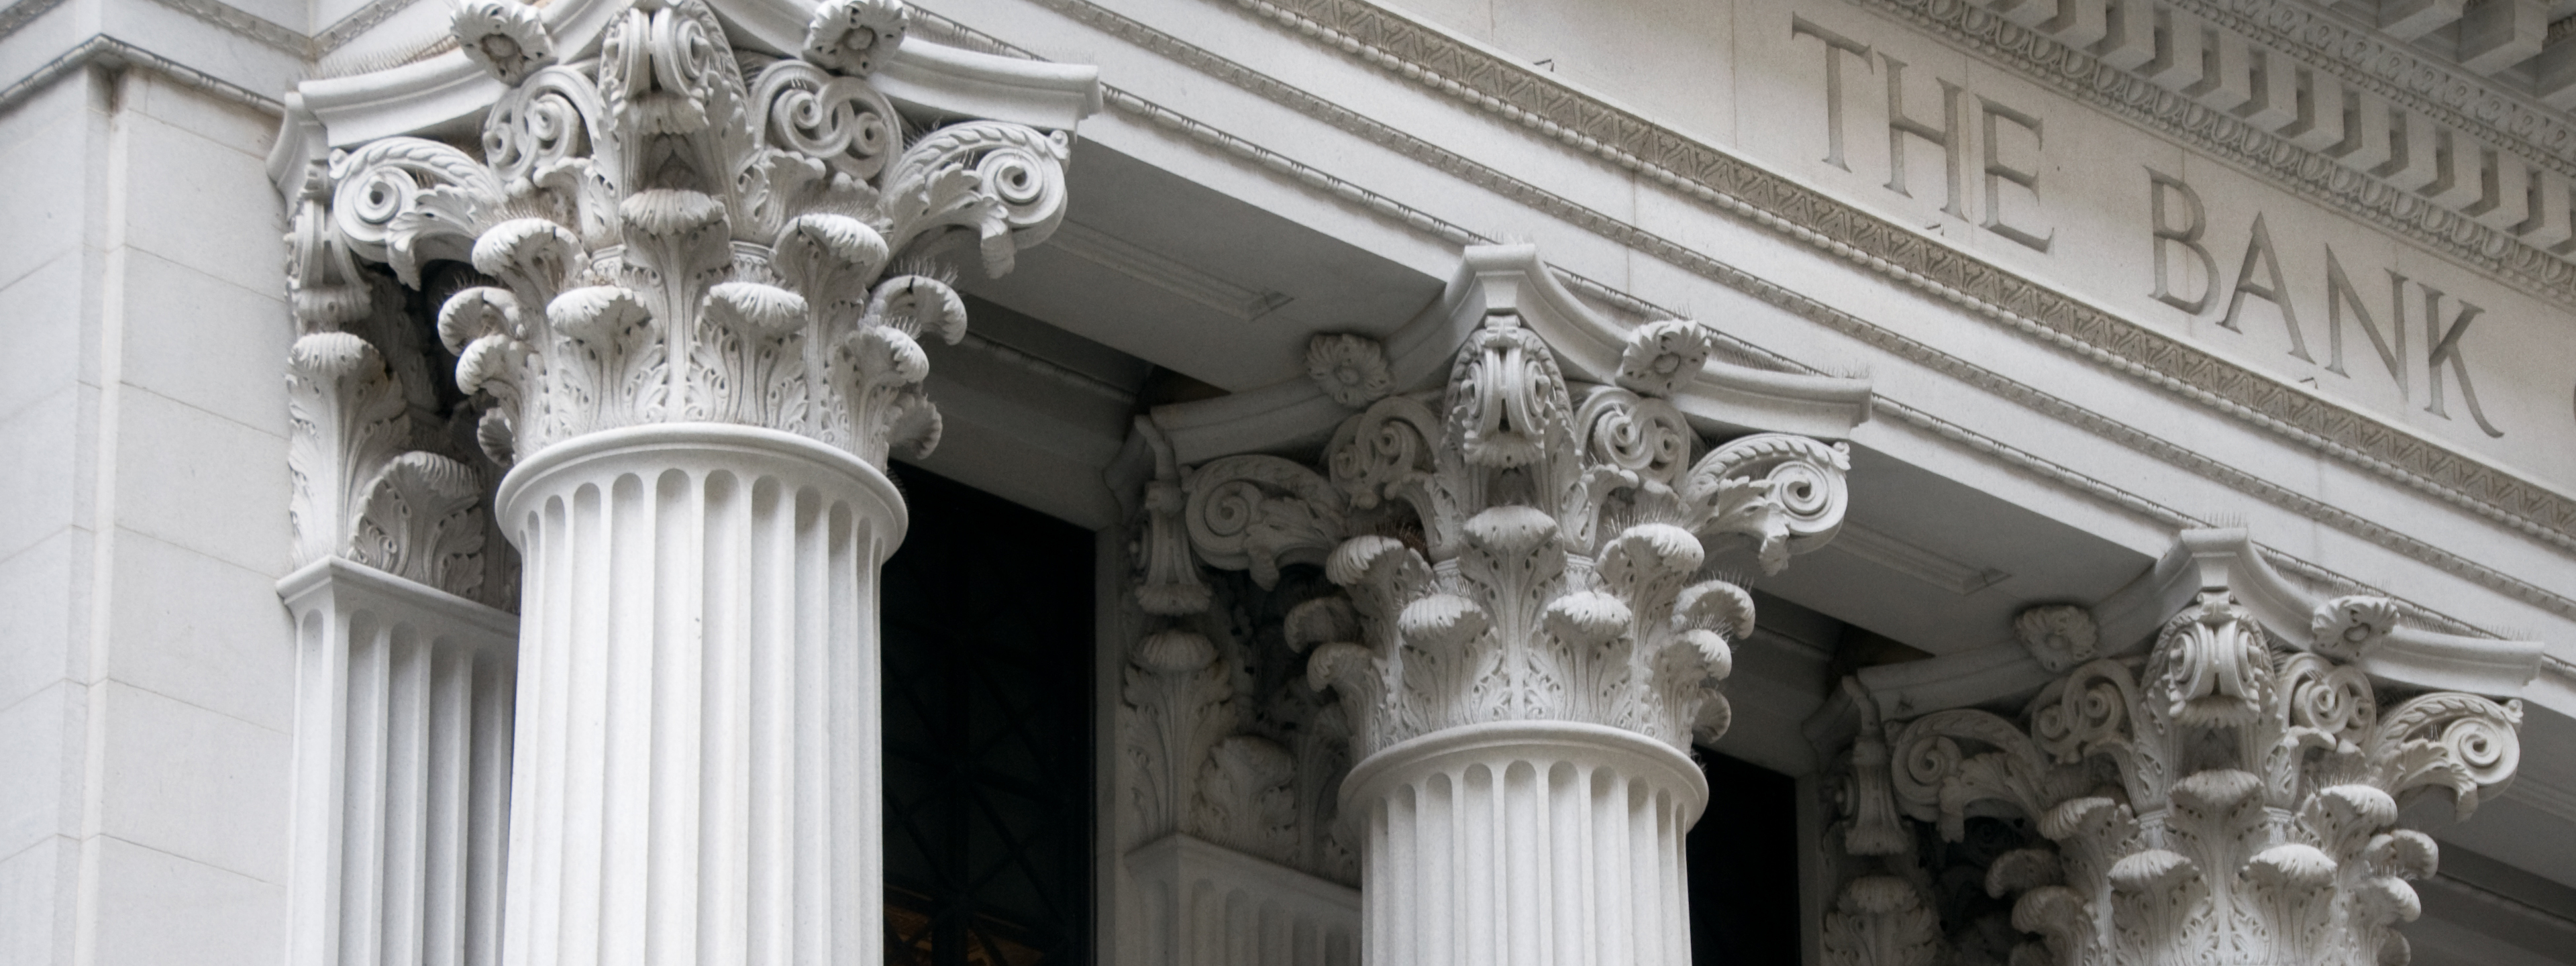 Ionic columns of a bank building.